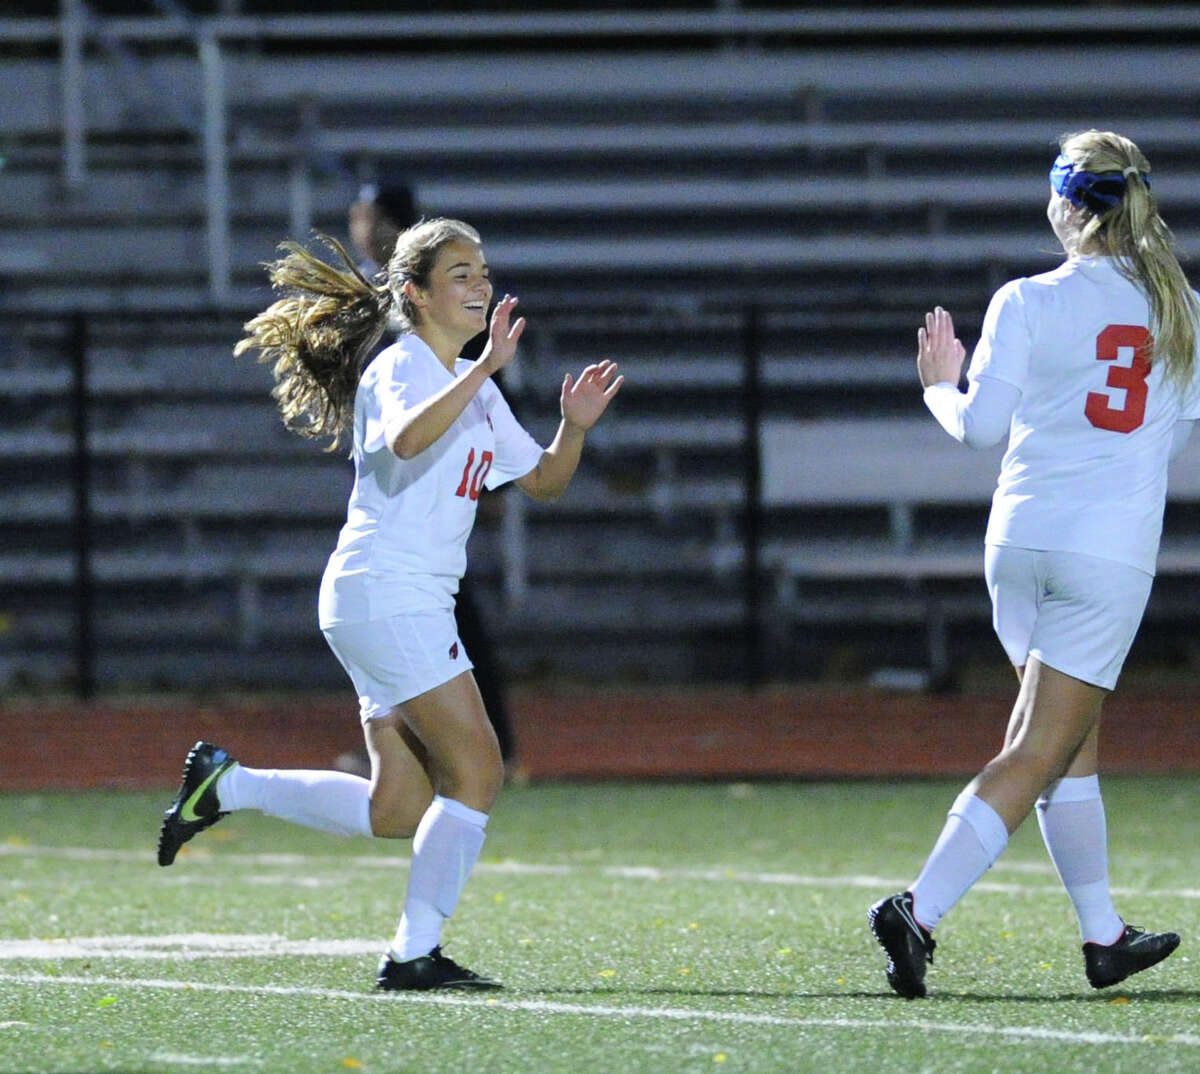 At left, Emily Berzolla (#10) of Greenwich smiles after scoring the only goal of the match during first half action of the girls high school soccer match between Greenwich High School and Trumbull High School at Greenwich, Conn., Thursday, Oct. 23, 2014. At right is Berzolla's Greenwich teammate Treloara Harrisson (#3). Greenwich won the match, 1-0.